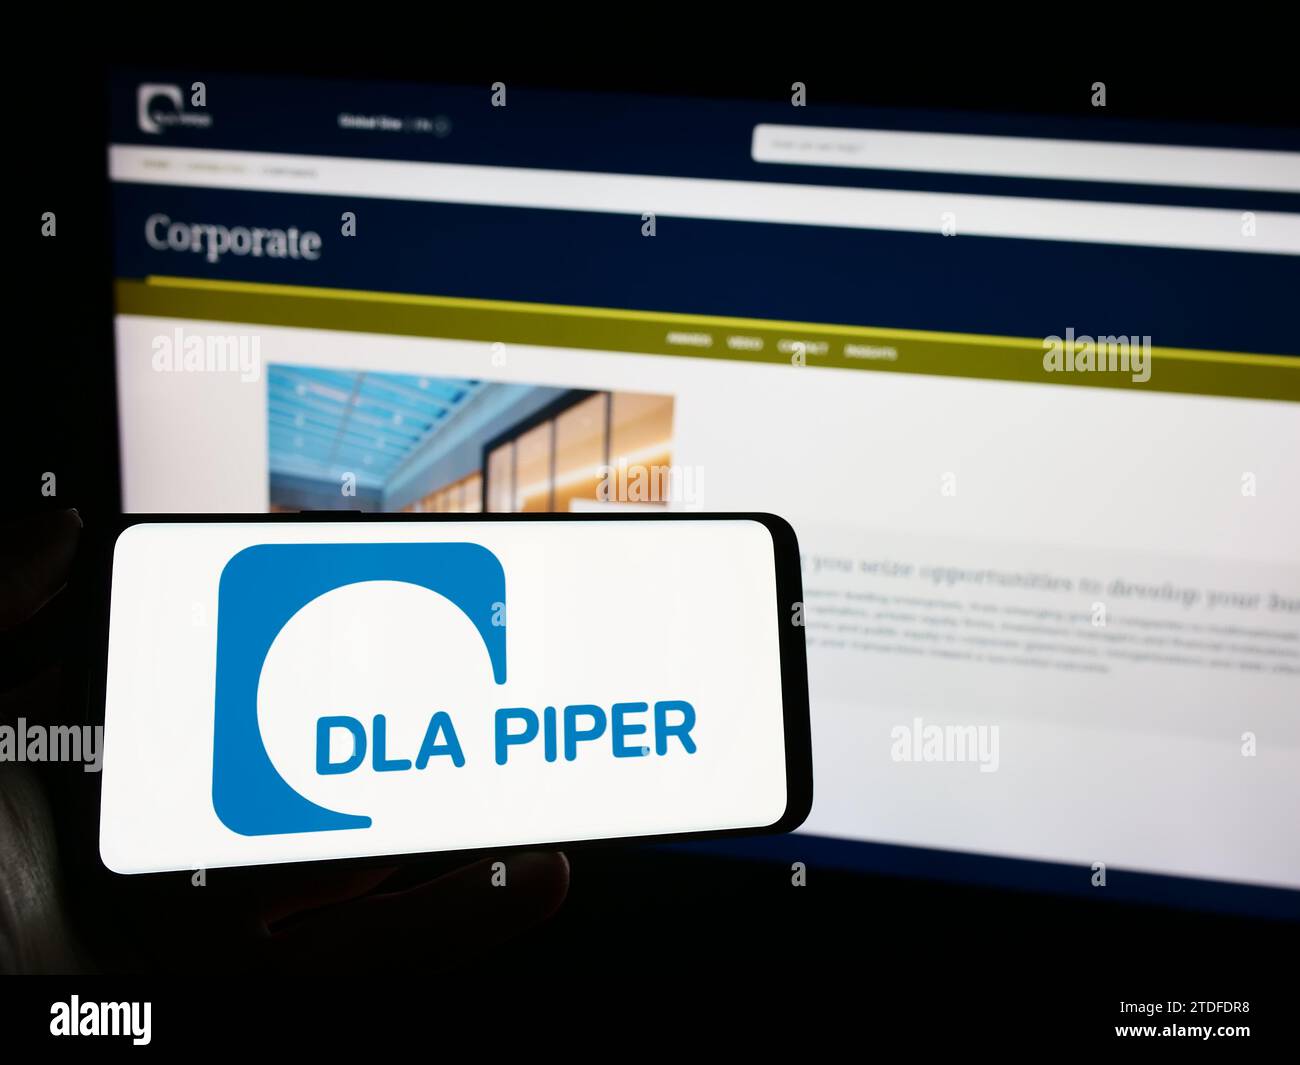 Person holding mobile phone with logo of law firm DLA Piper in front of business web page. Focus on phone display. Stock Photo